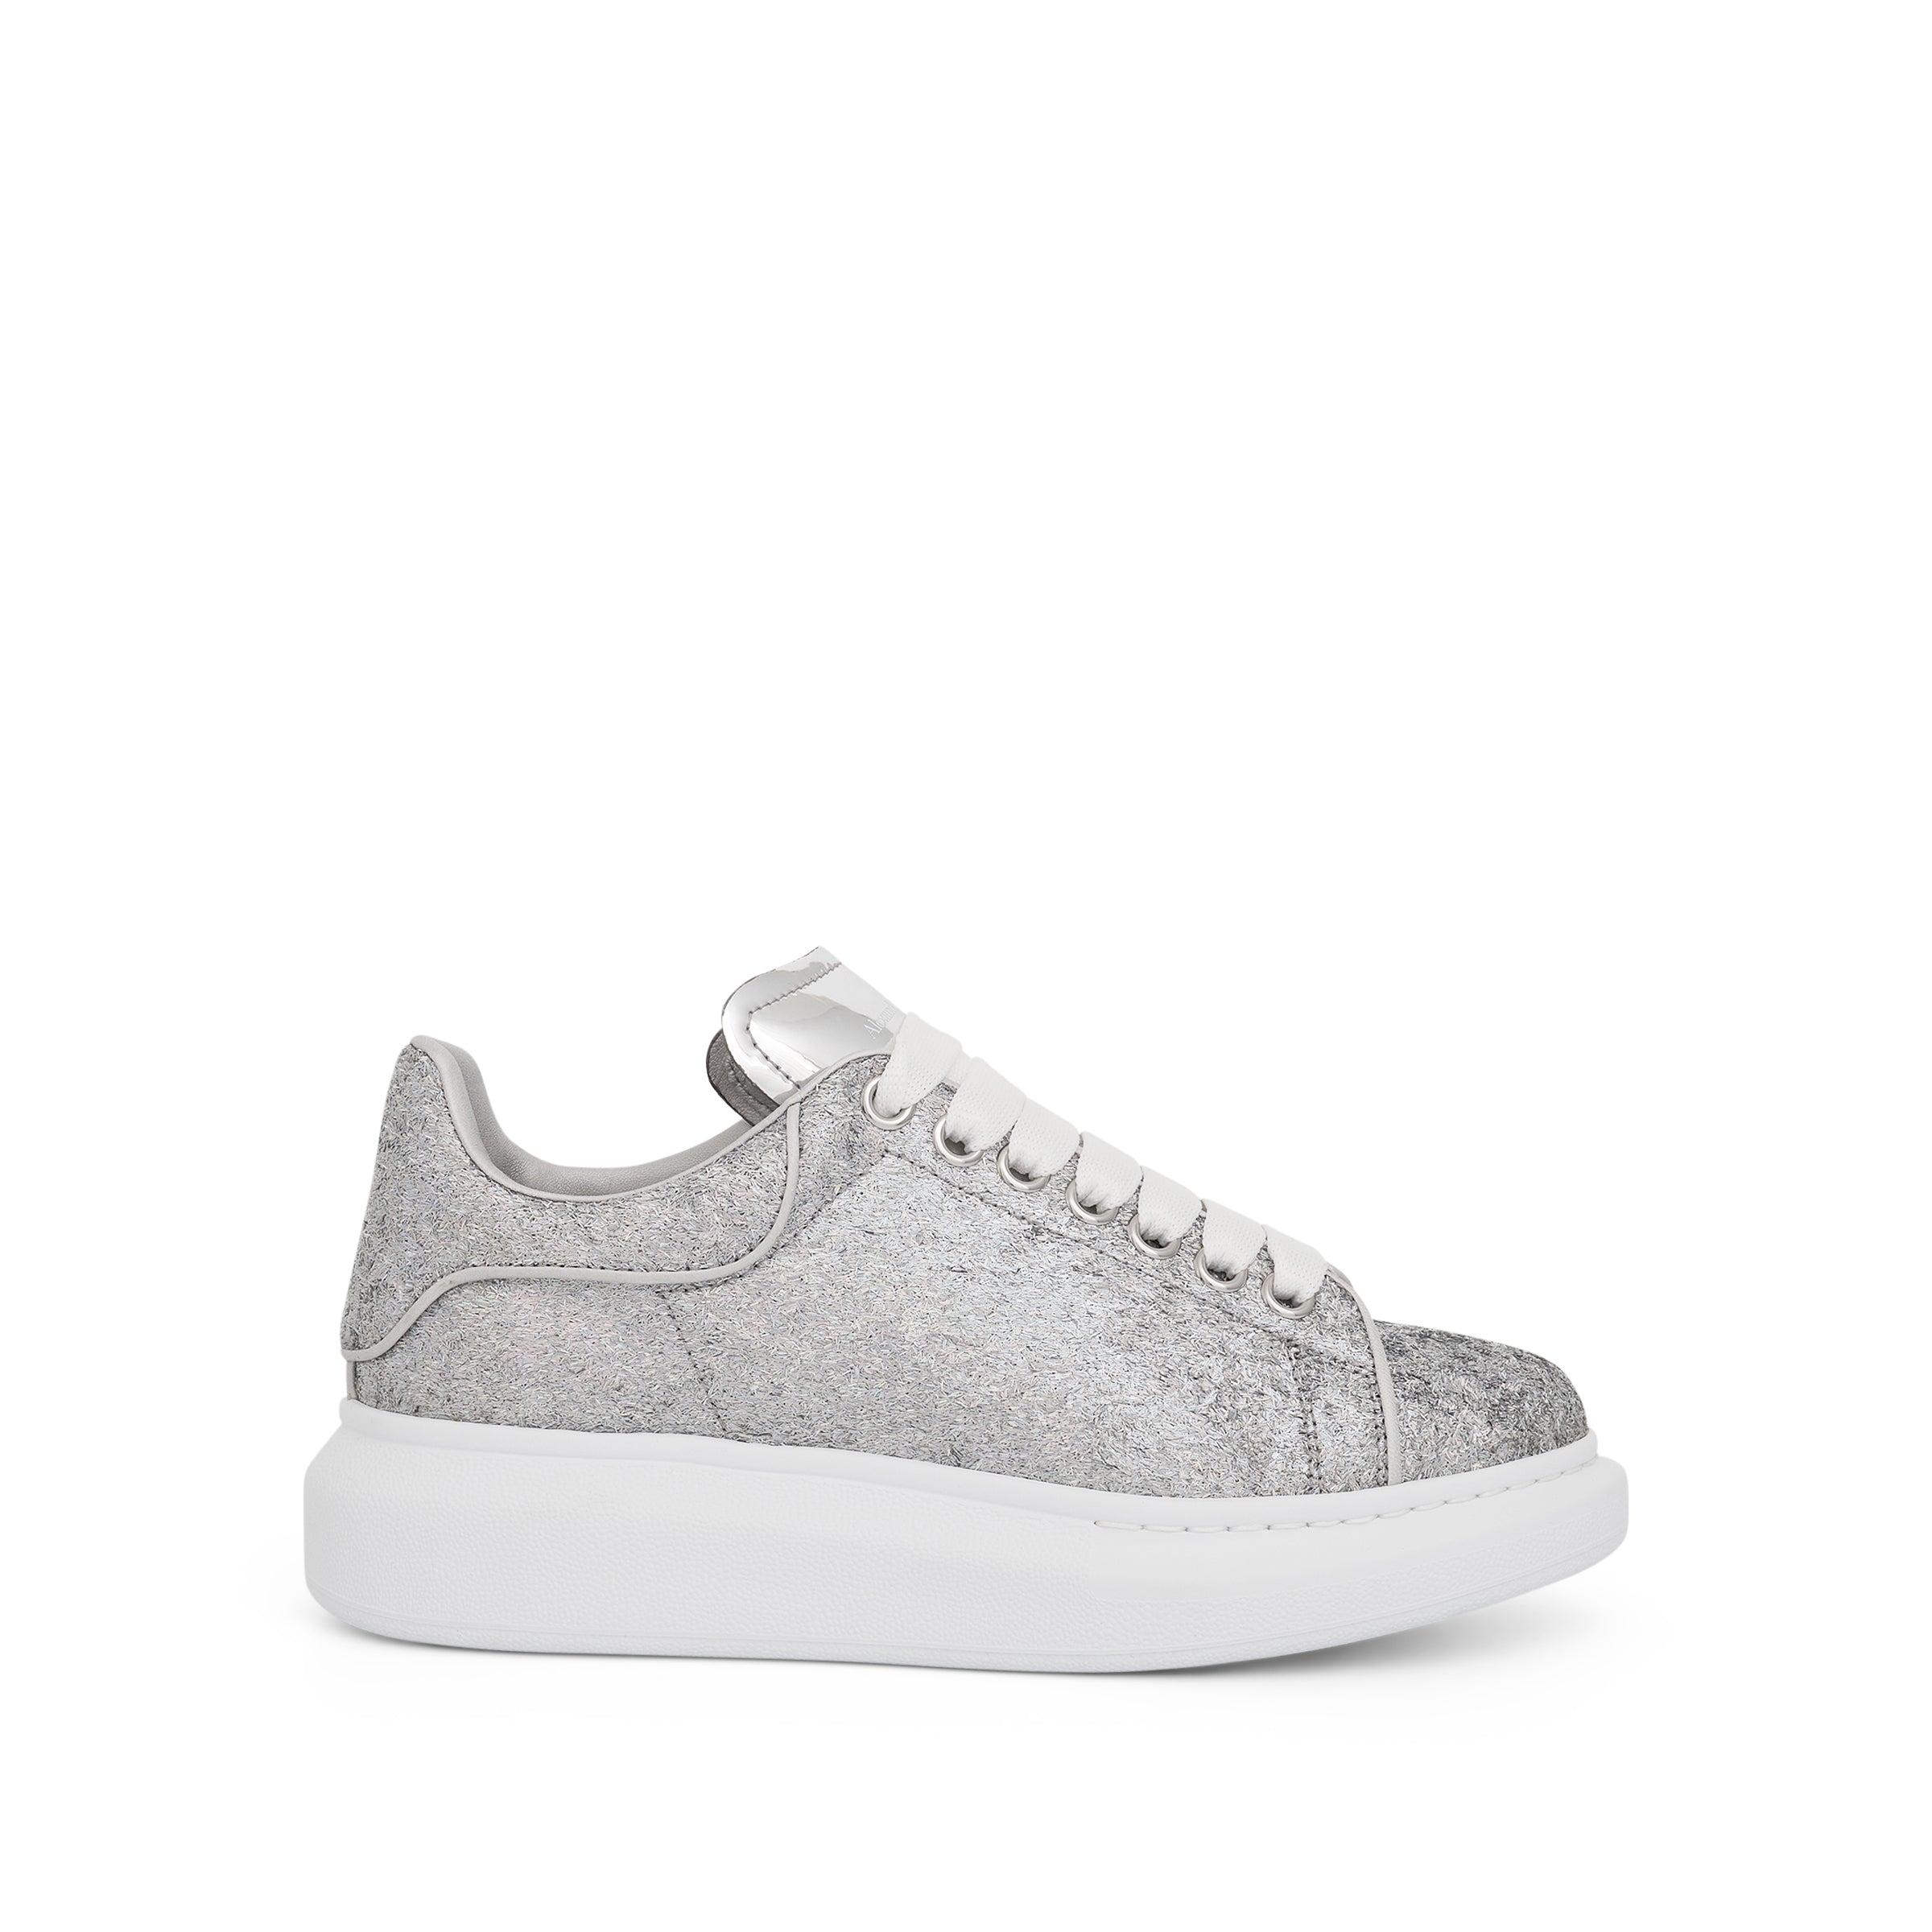 Alexander McQueen Oversized White And Silver Glitter Sneakers New